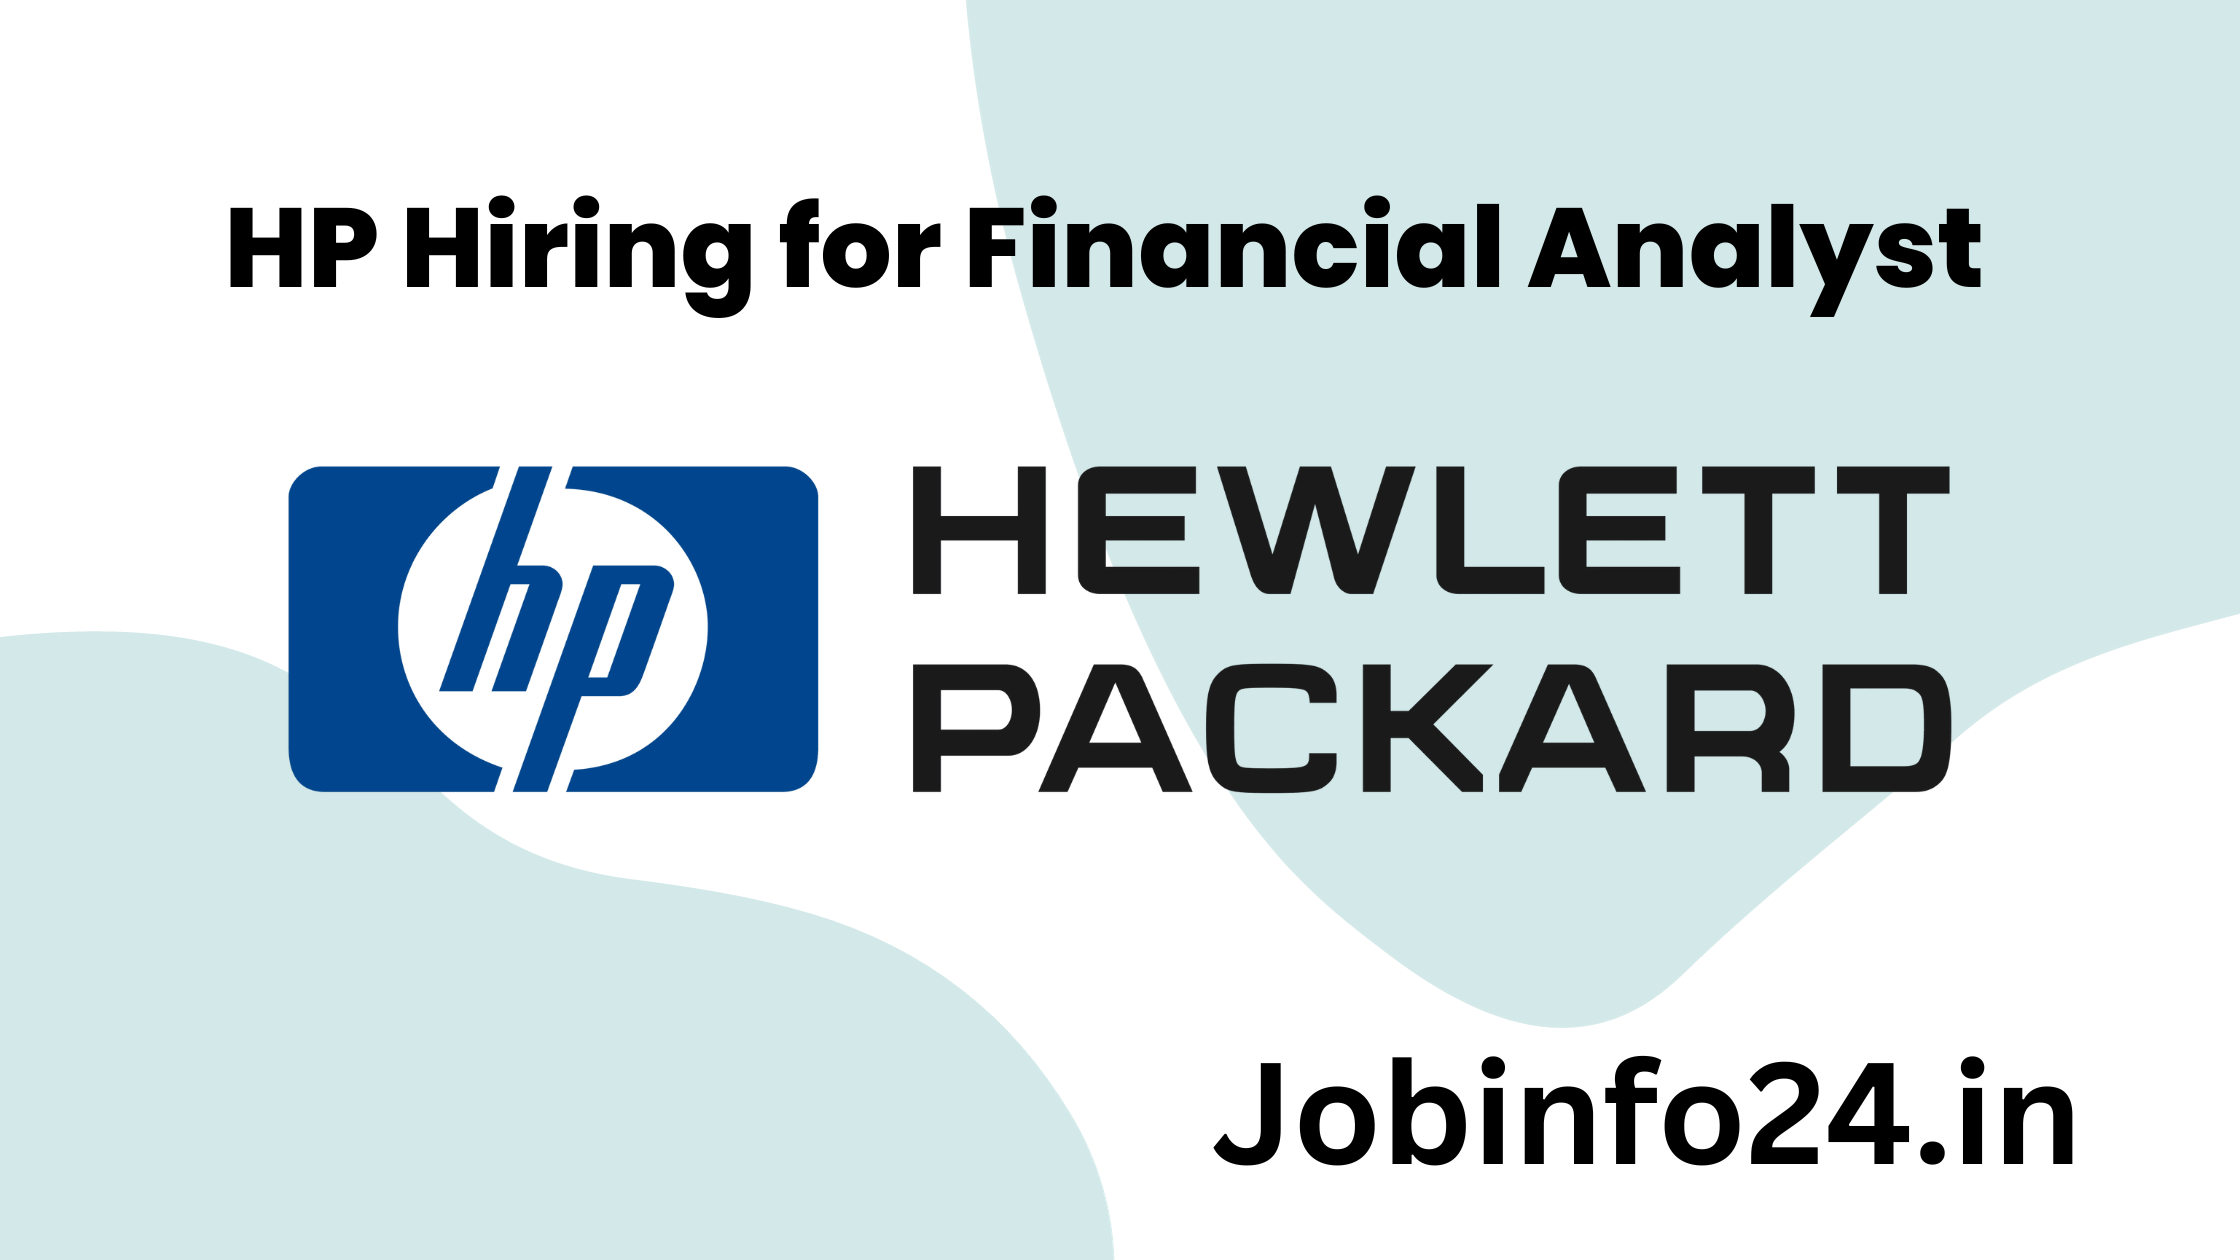 HP Hiring for Financial Analyst